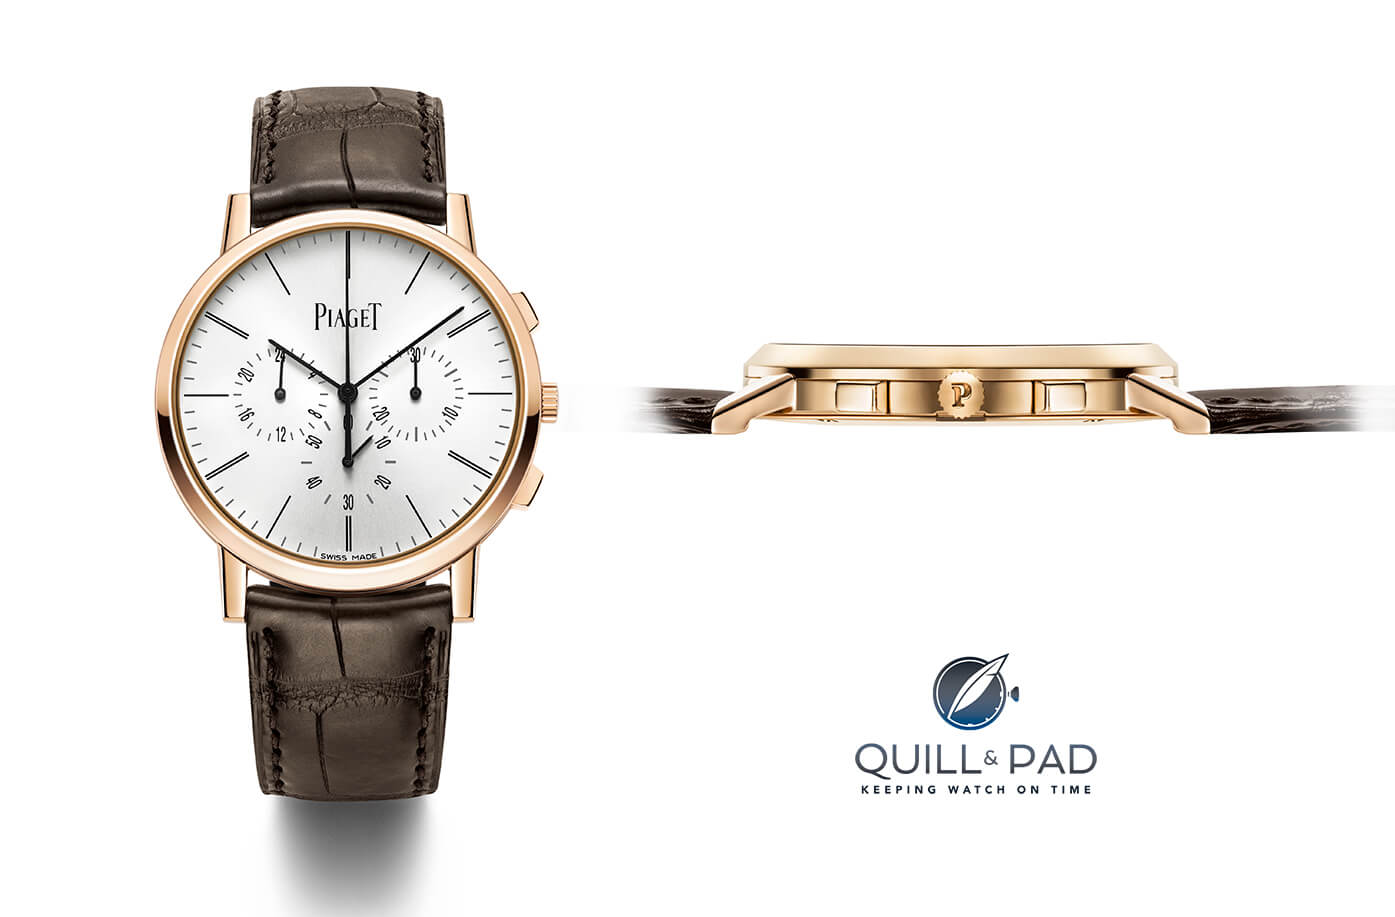 Piaget's Altiplano Chronograph is the world's thinnest chronograph